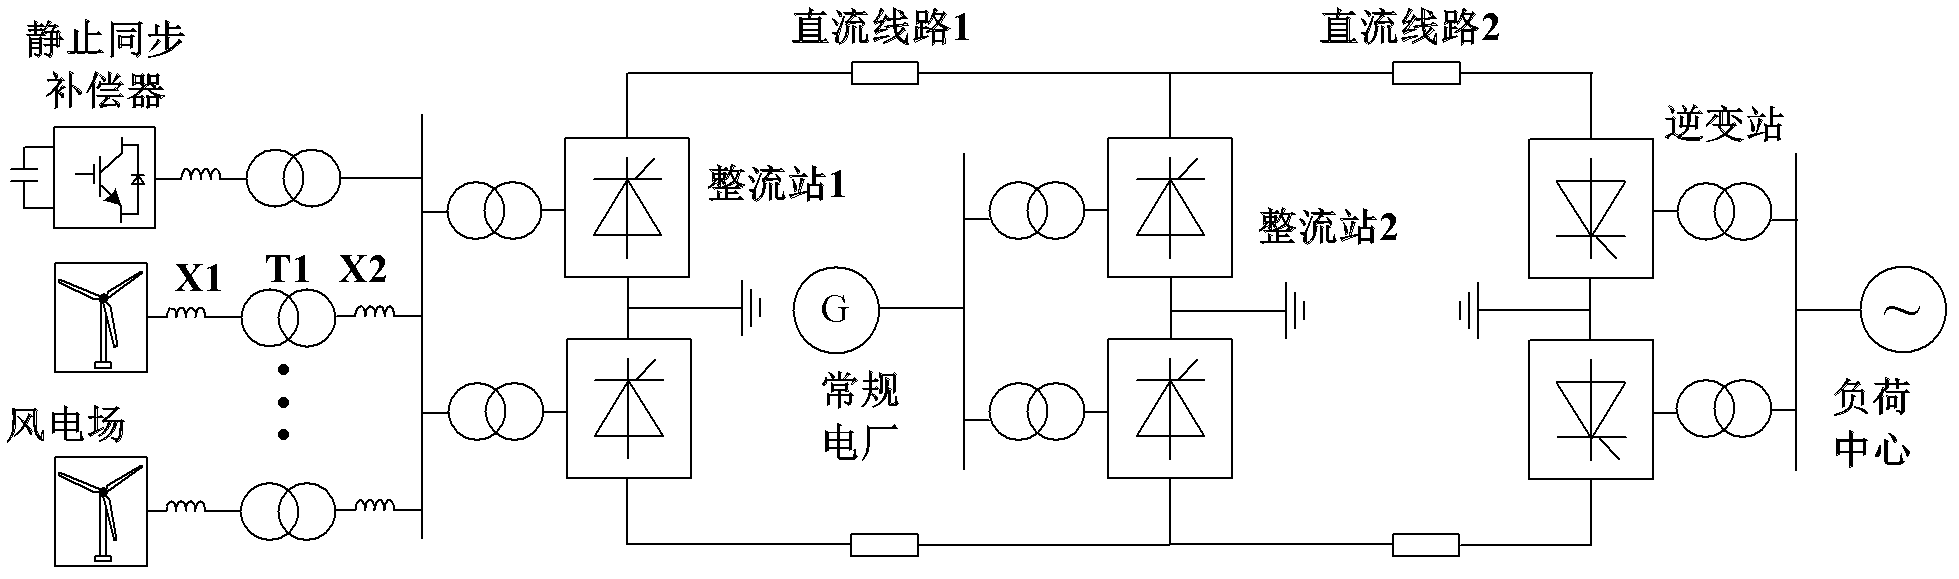 Multi-terminal DC (Direct Current) power transmission system for combined synchronization of wind power plant and conventional power plant